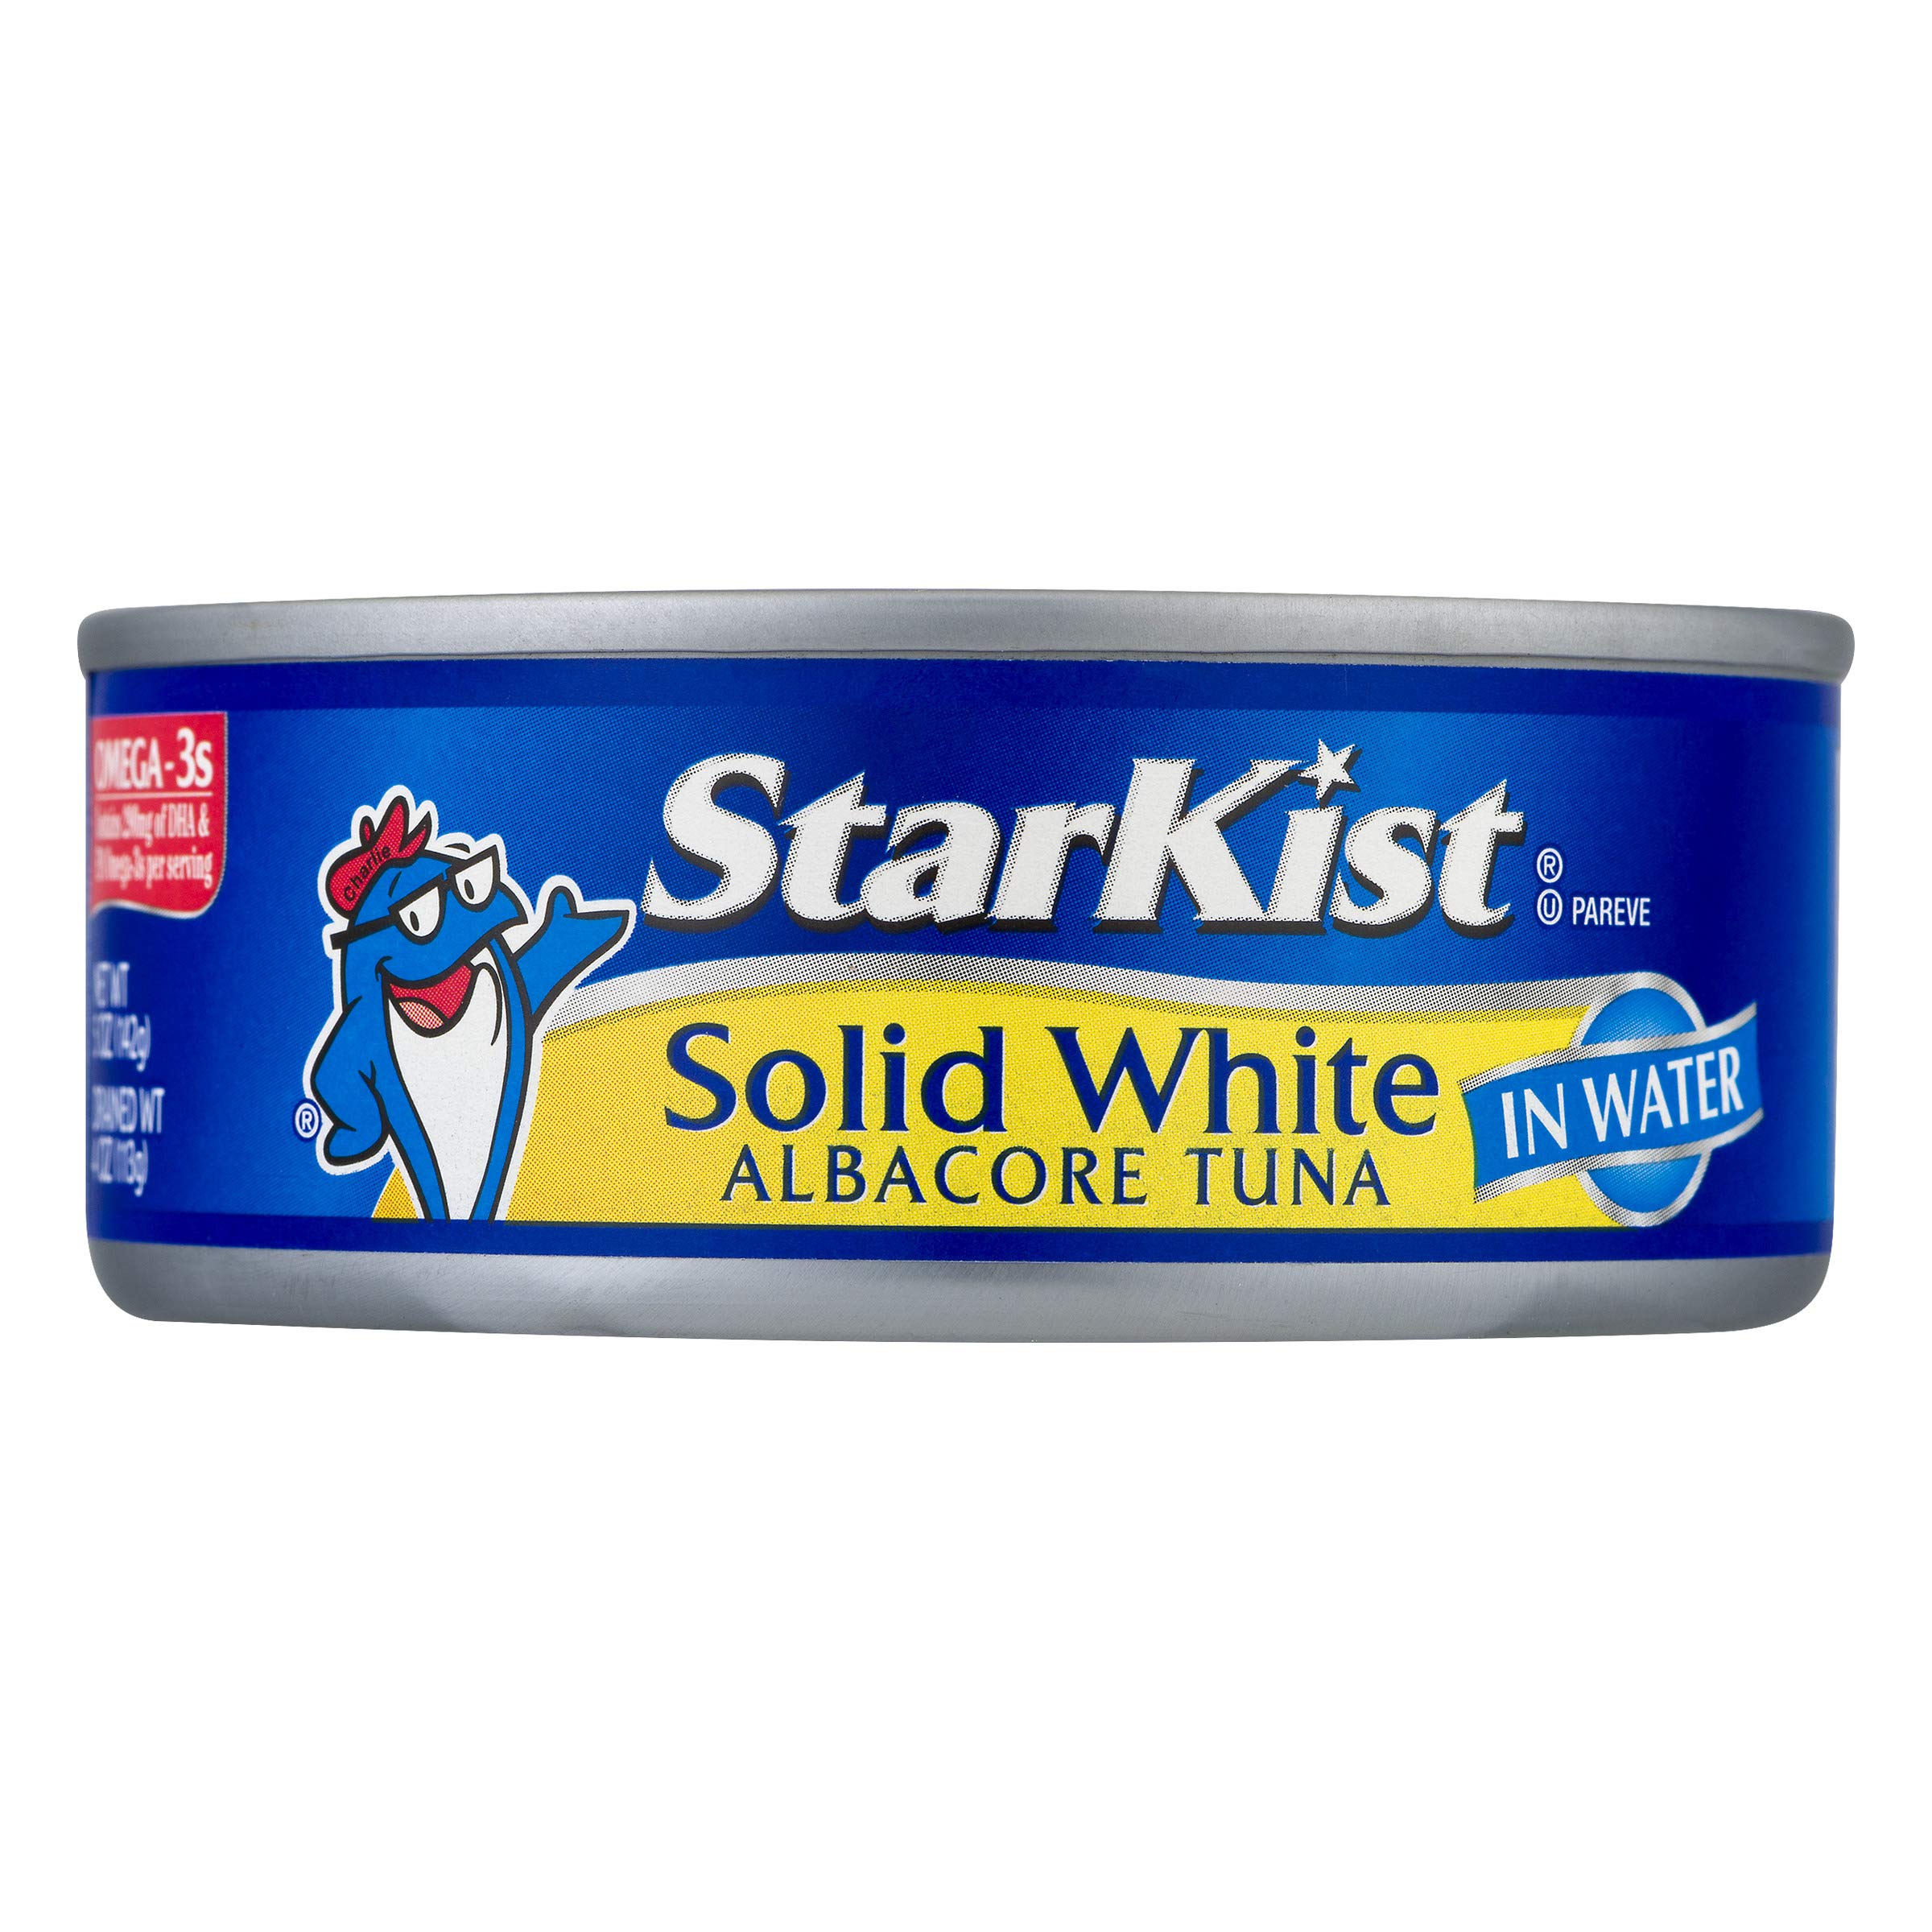 Amazon Warehouse - StarKist Solid White Albacore Tuna in Water, 5 Oz, Pack of 24 - $22.79